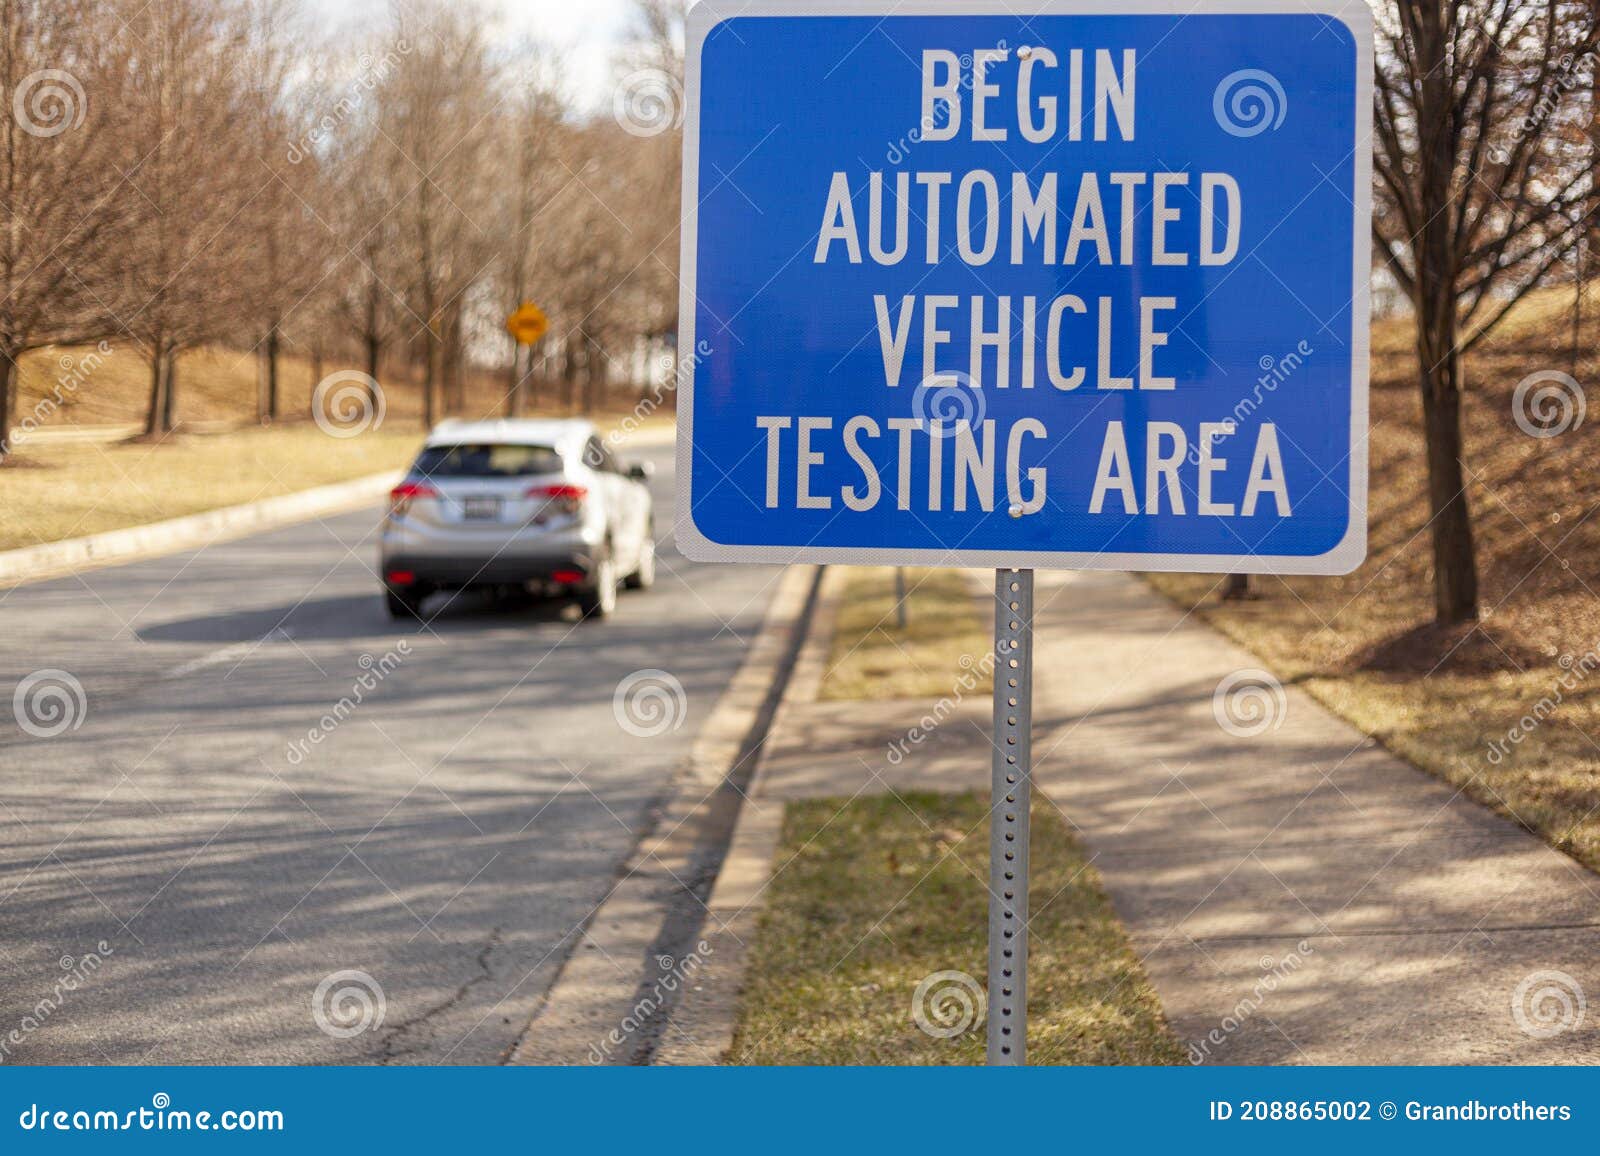 begin automated vehicle testing area road sign